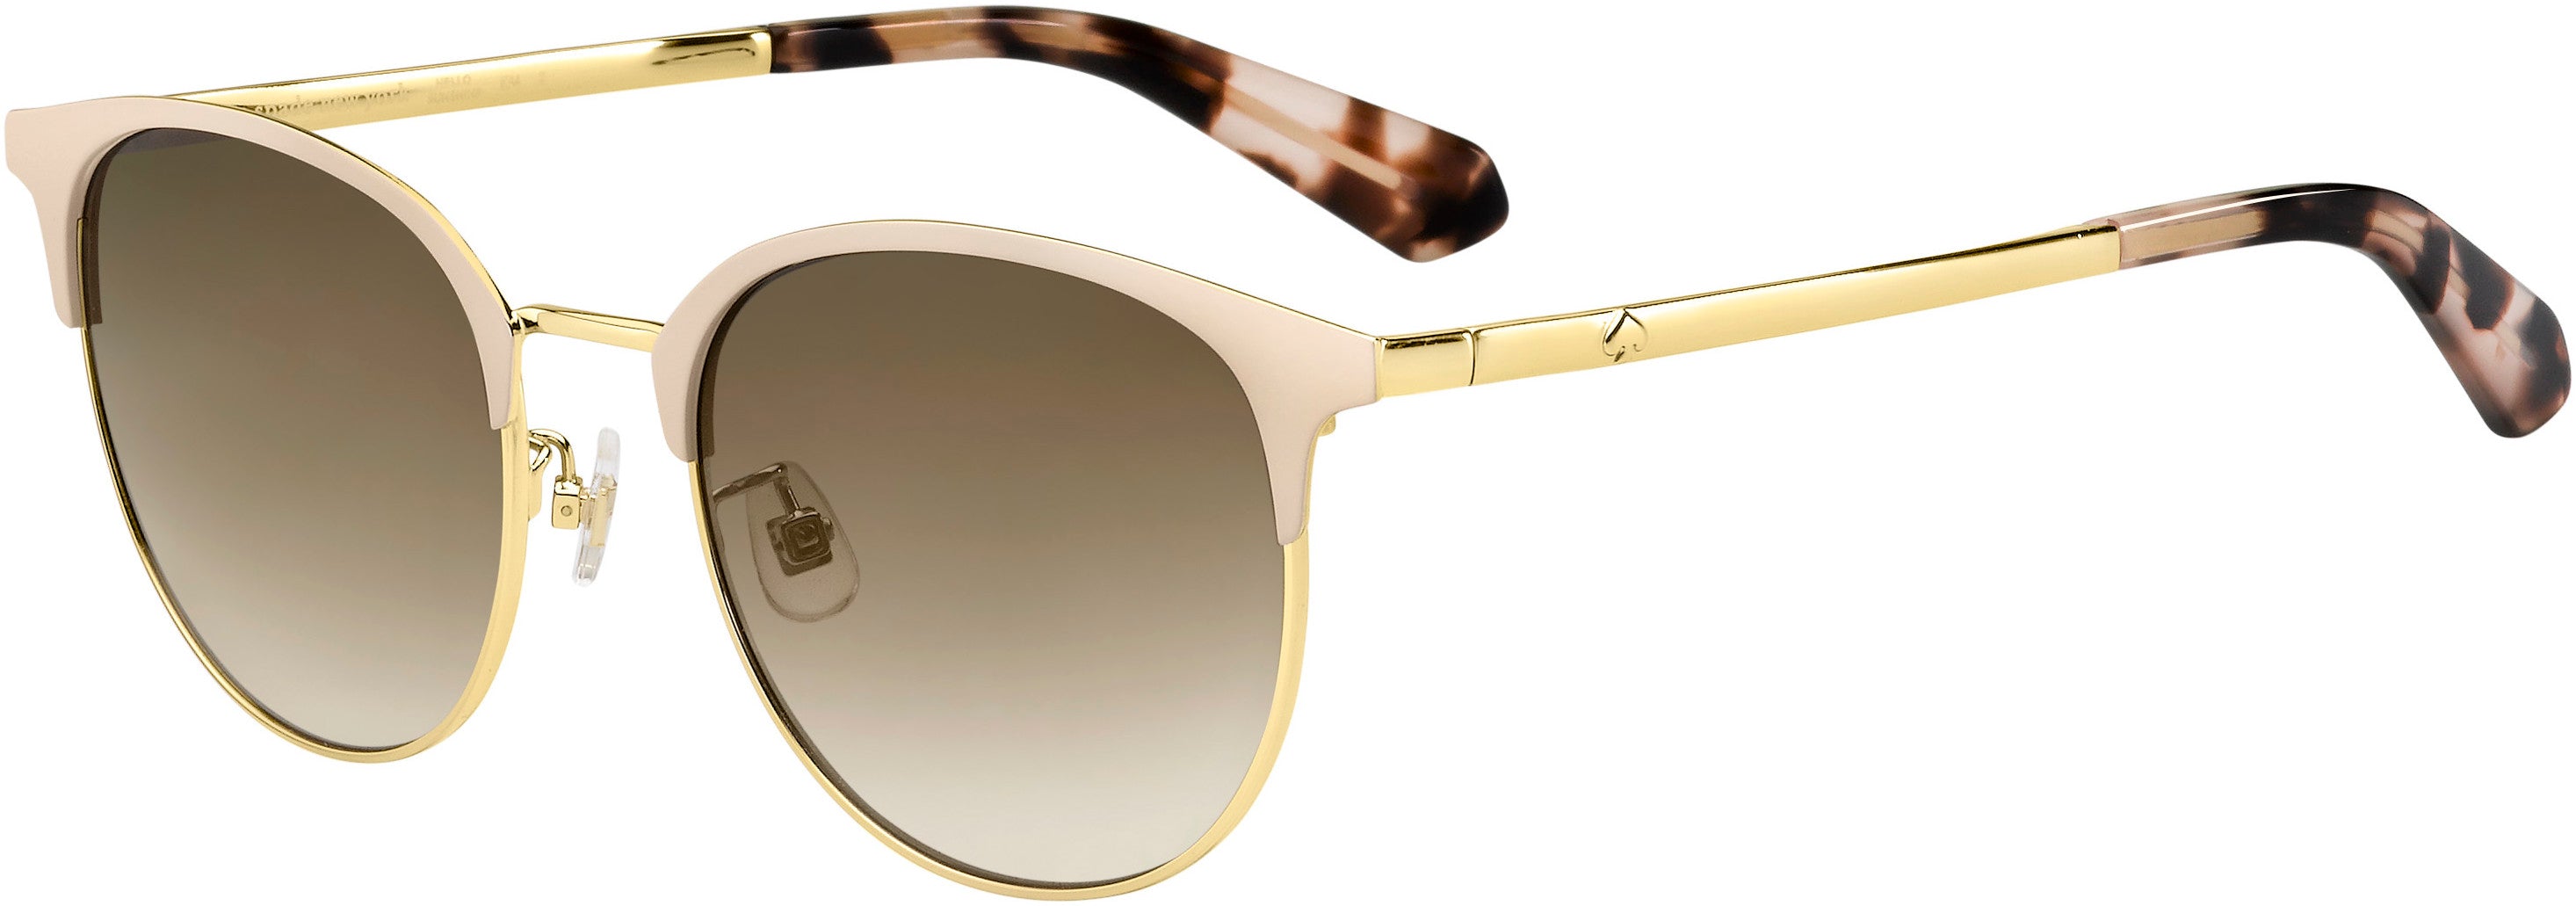 Kate Spade Delacey/F/S Browline Sunglasses 0S45-0S45  Pink Gold (HA Brown Gradient)